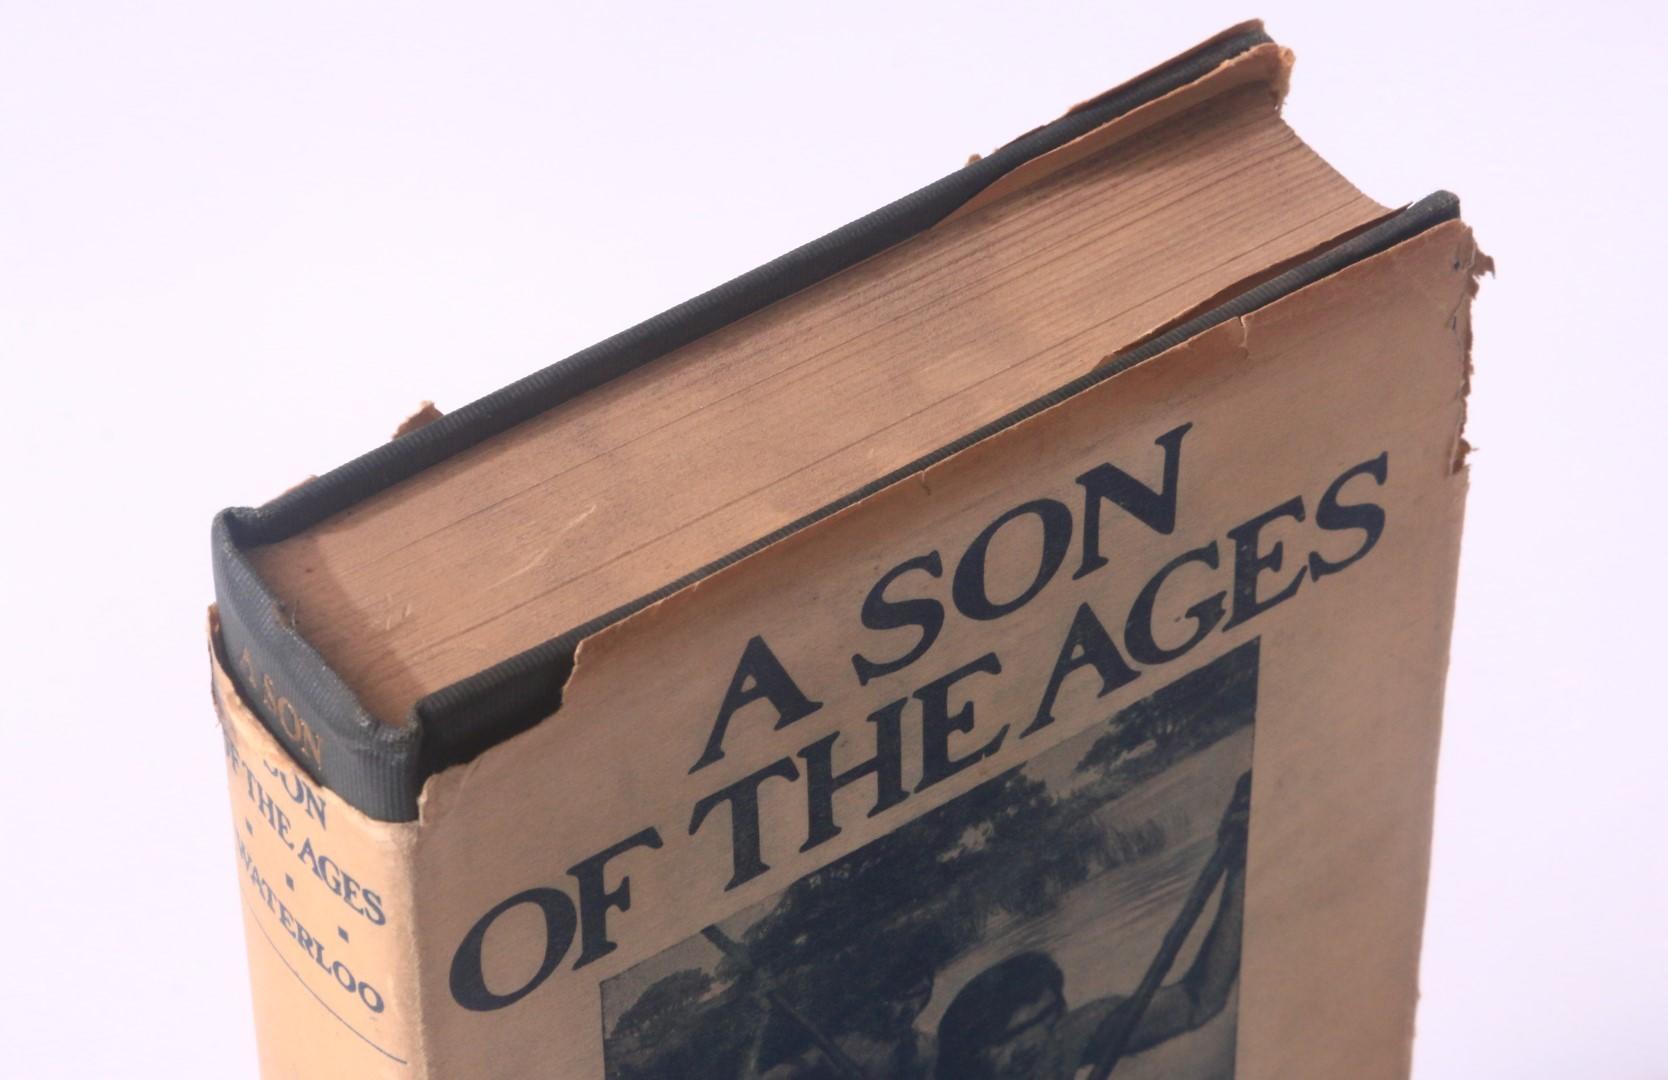 Stanley Waterloo - A Son of the Ages the Reincarnations and Adventures of Scar, the Link a Story of Man from the Beginning. - Doubleday, Page & Co., 1914, First Edition.